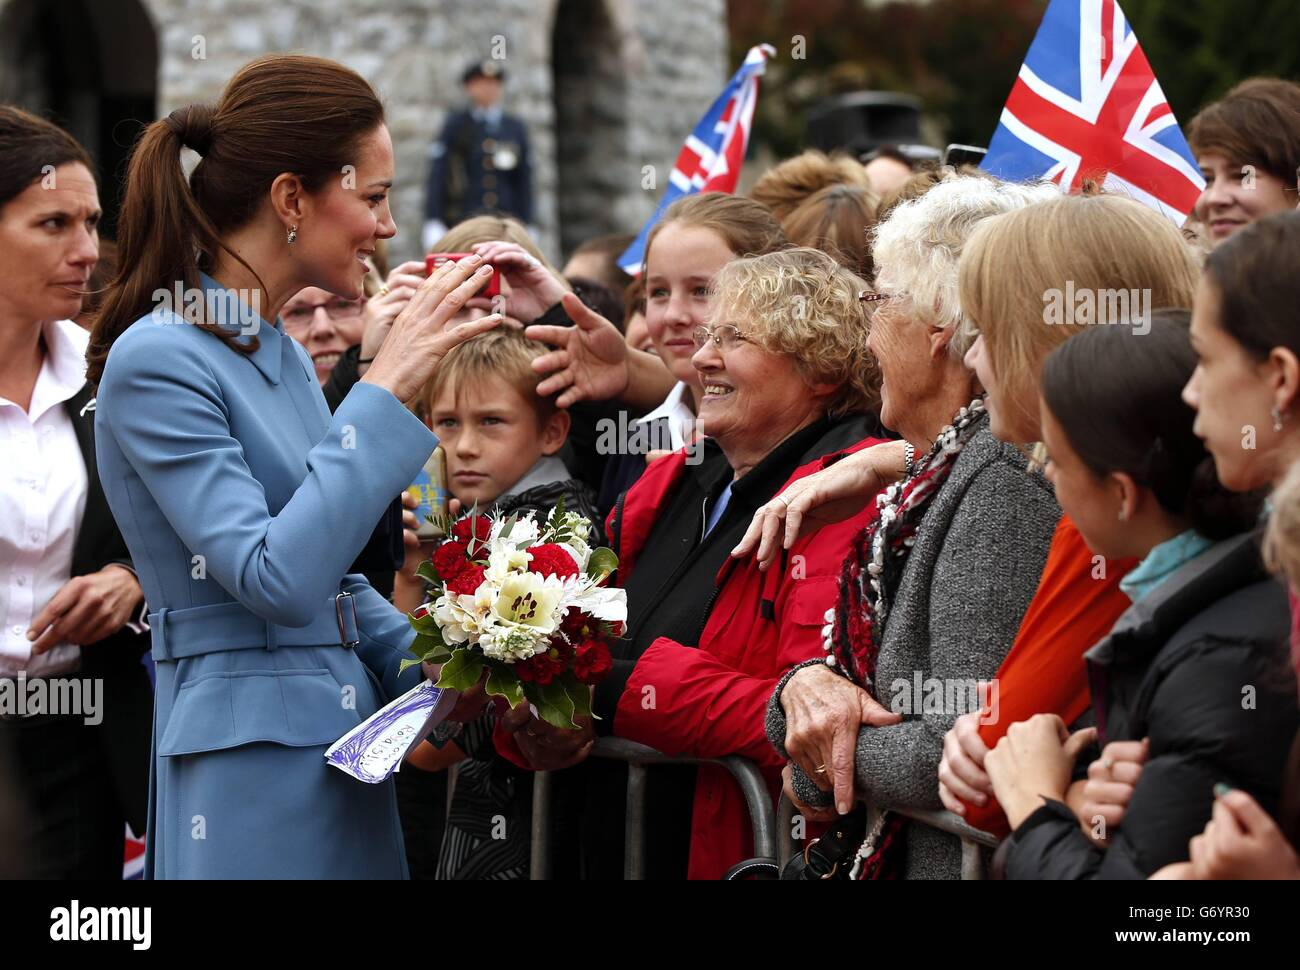 The Duchess of Cambridge, talks with members of the crowd after laying a wreath at the war memorial in Seymour Square in the town of Blenheim in New Zealand. The royal couple are undertaking a 19-day official visit to New Zealand and Australia with their son George. Stock Photo